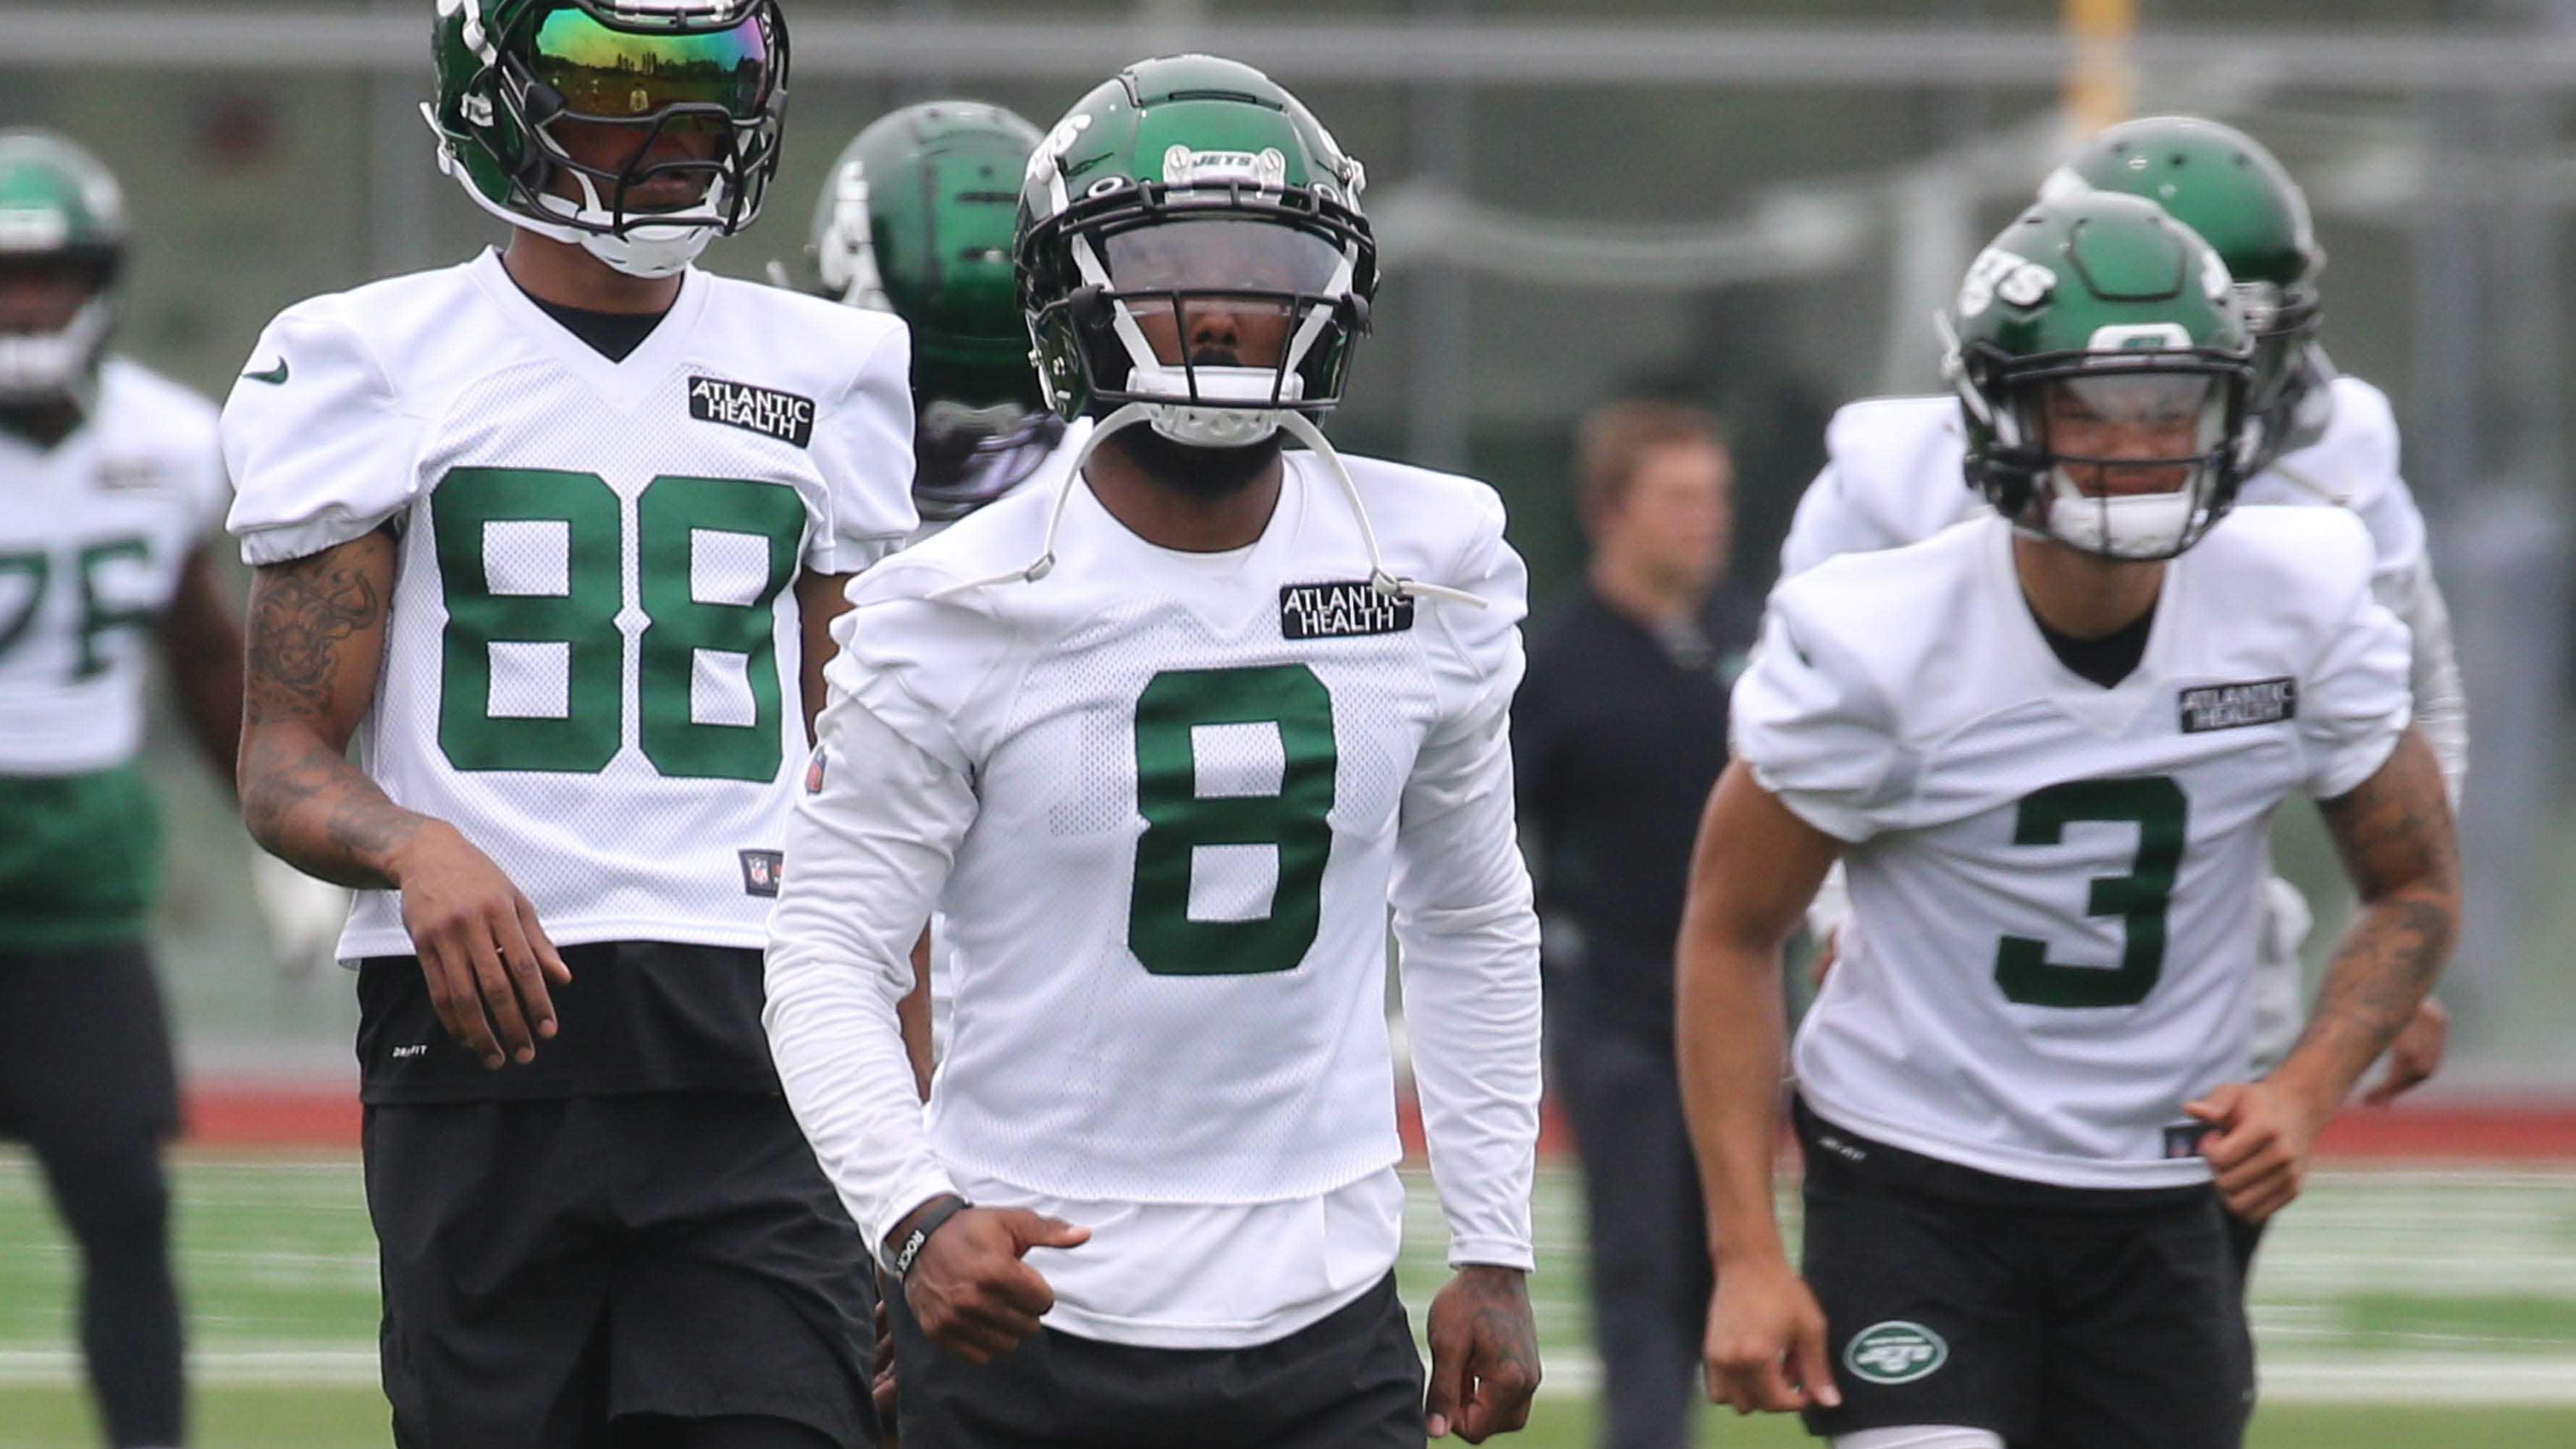 Wide receiver Elijah Moore participates in practice as the Jets hold OTA's / Chris Pedota, NorthJersey.com via Imagn Content Services, LLC